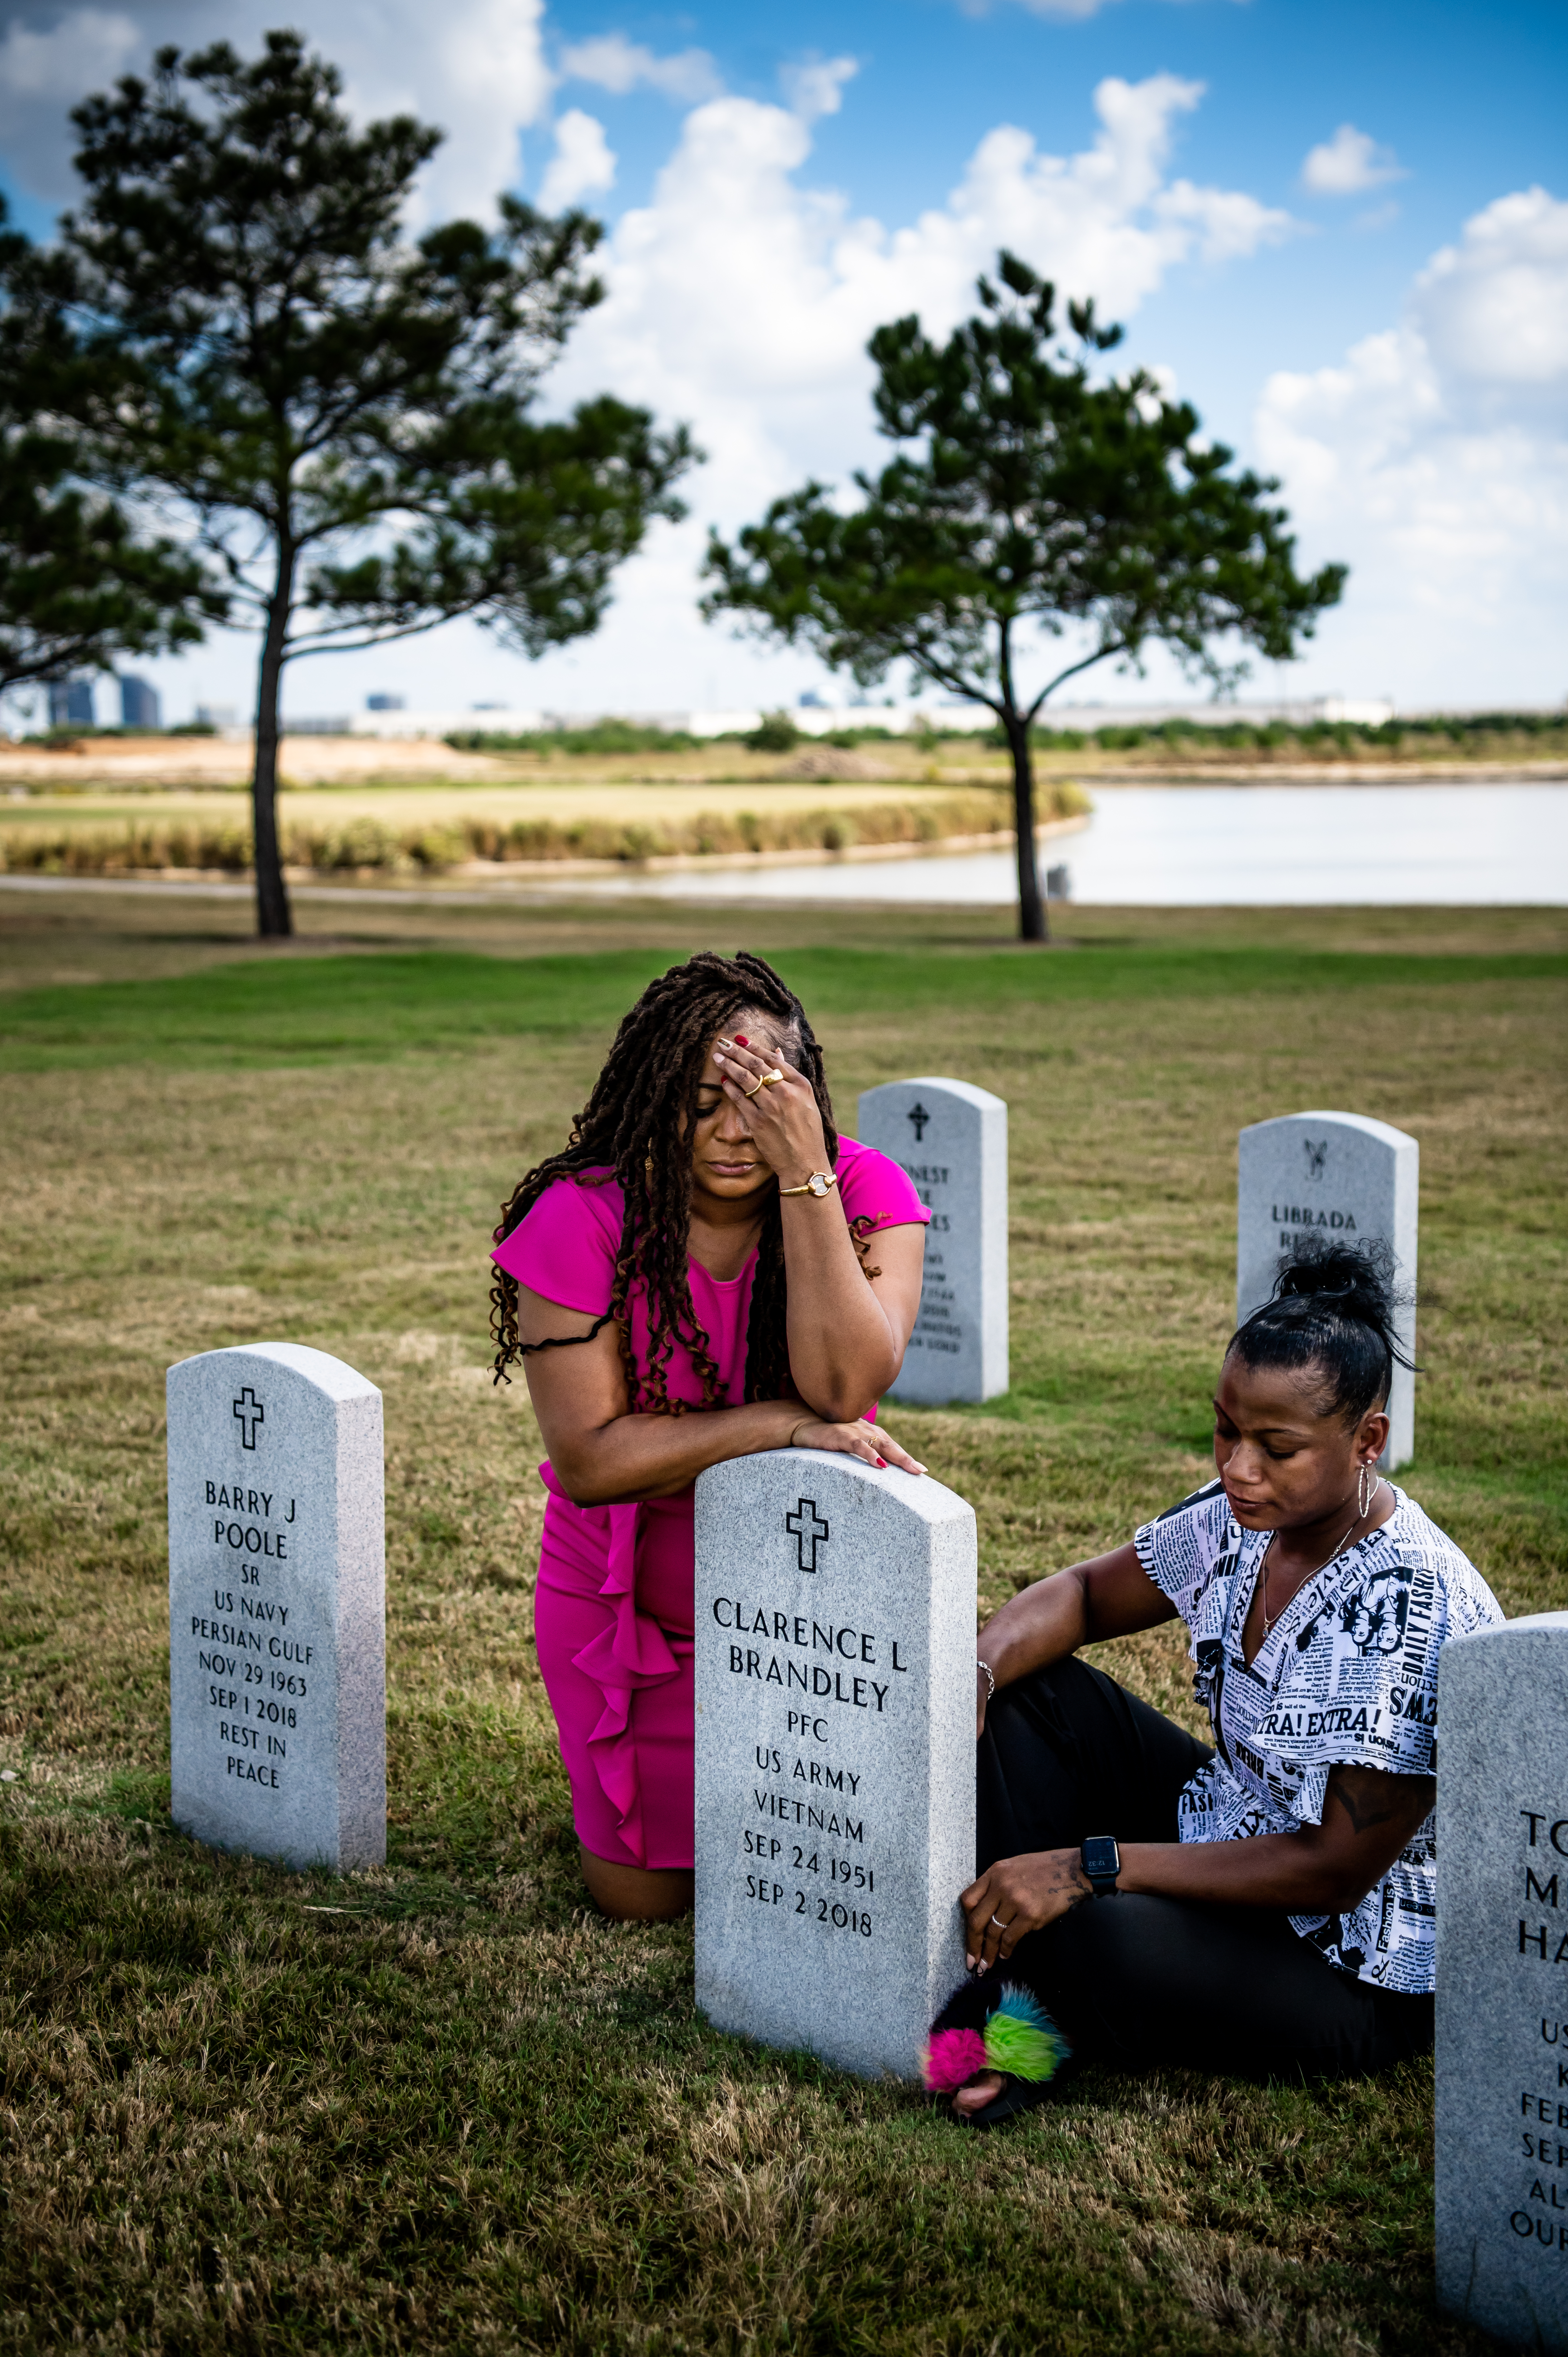 Two Black women gather mournfully around the grave of Clarence Brandley, which is in a well-maintained graveyard by a small lake.